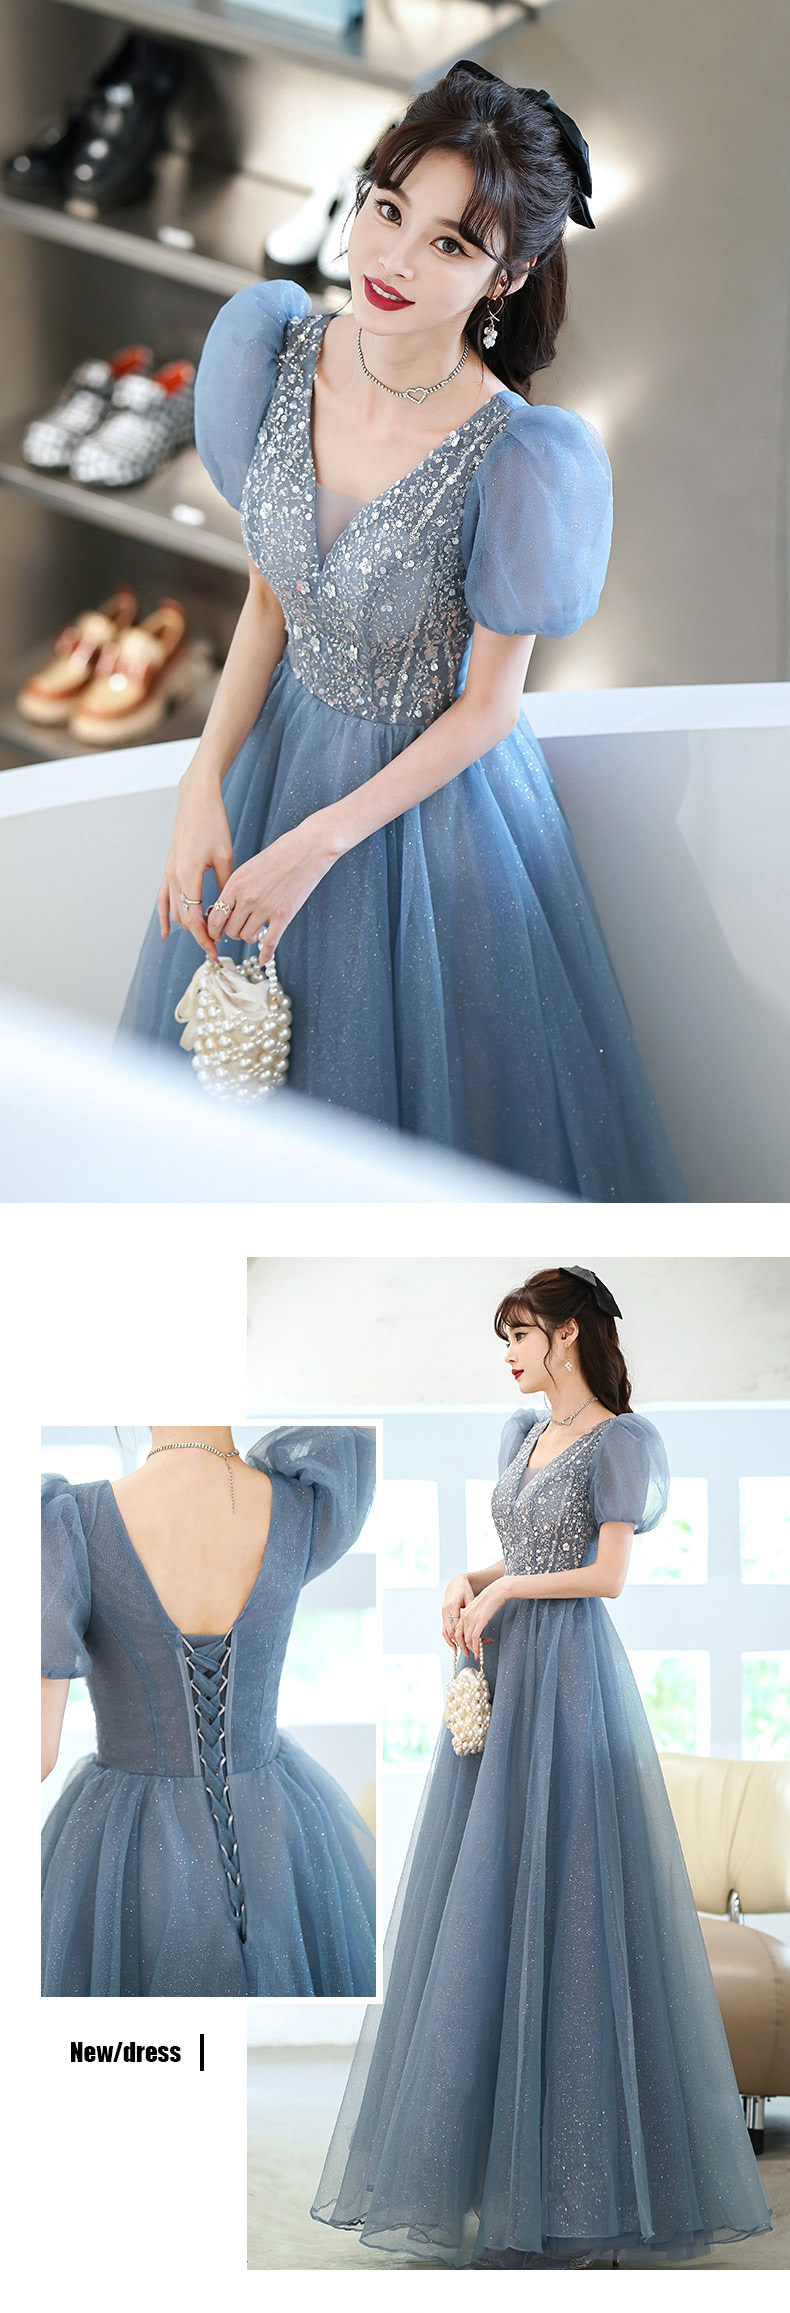 A-Line-Blue-Tulle-Short-Sleeve-Prom-Party-Formal-Evening-Dress14.jpg